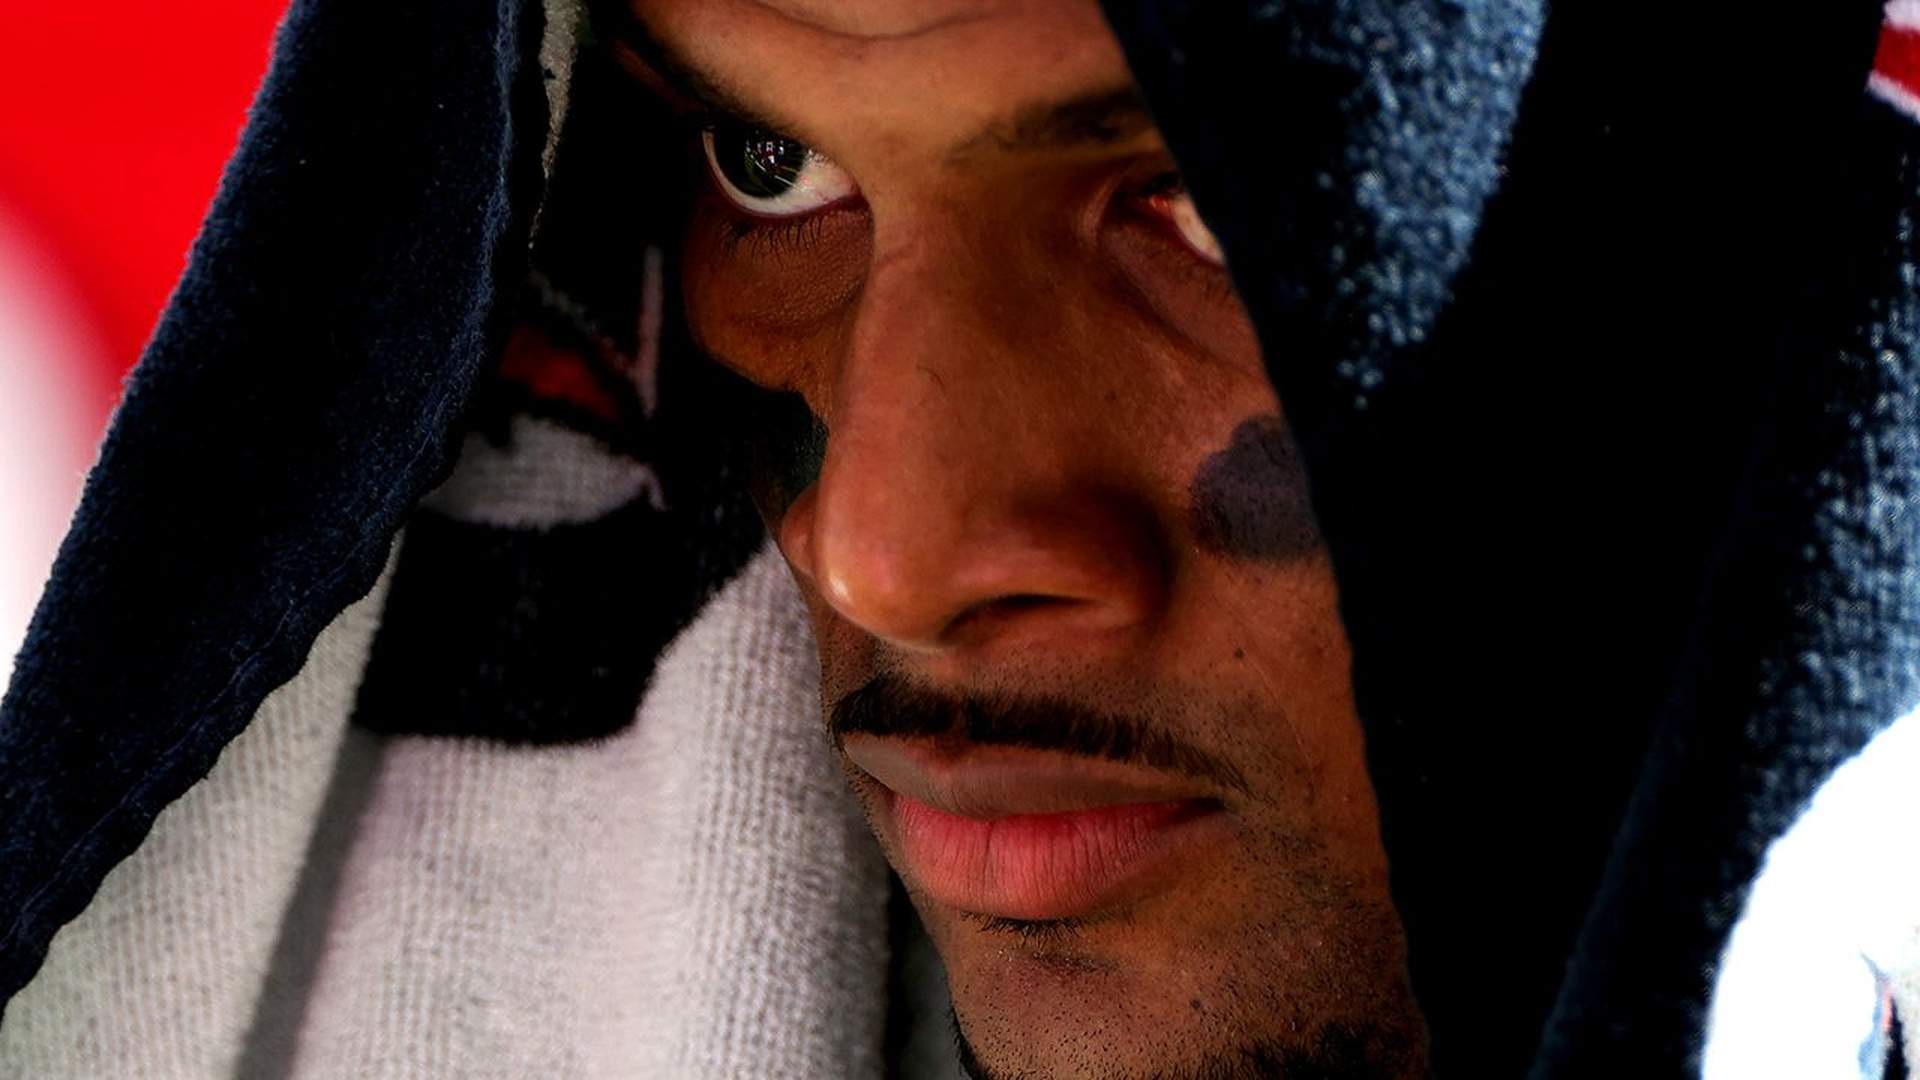 Sources: Deshaun Watson had ‘completely consensual’ sexual encounters with ‘some’ of his accusers